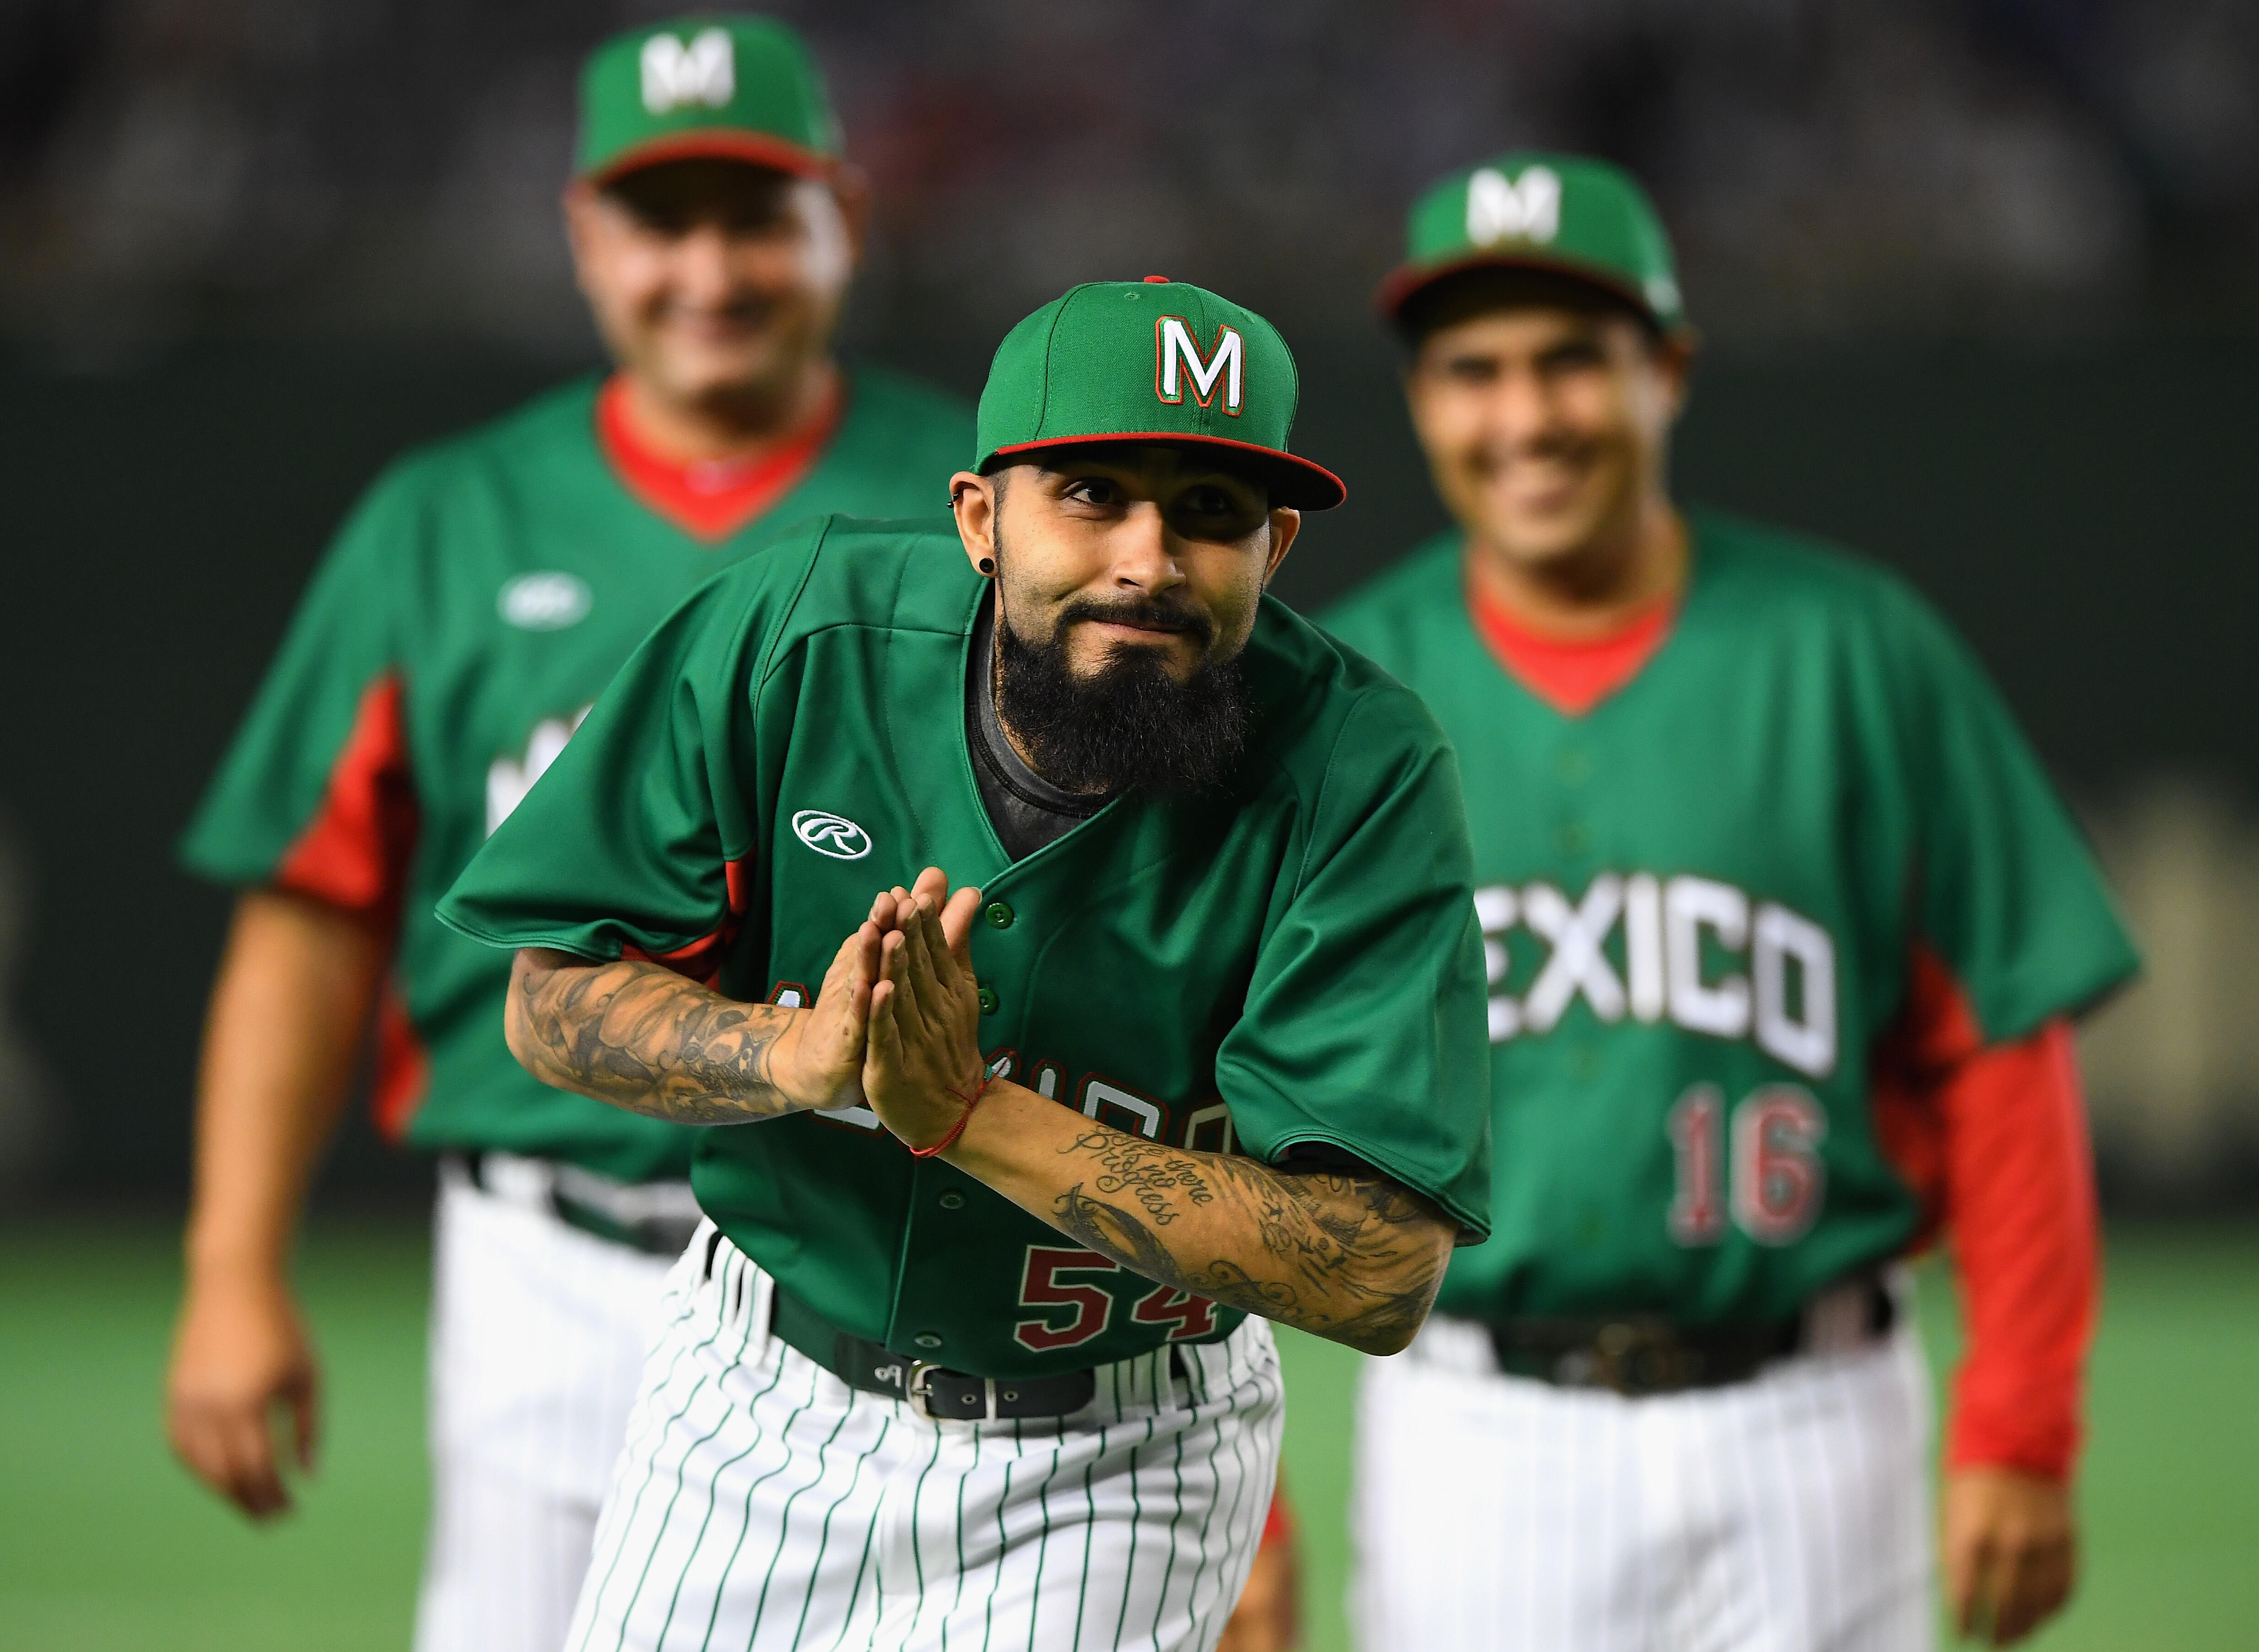 Get to know Dodgers reliever Sergio Romo